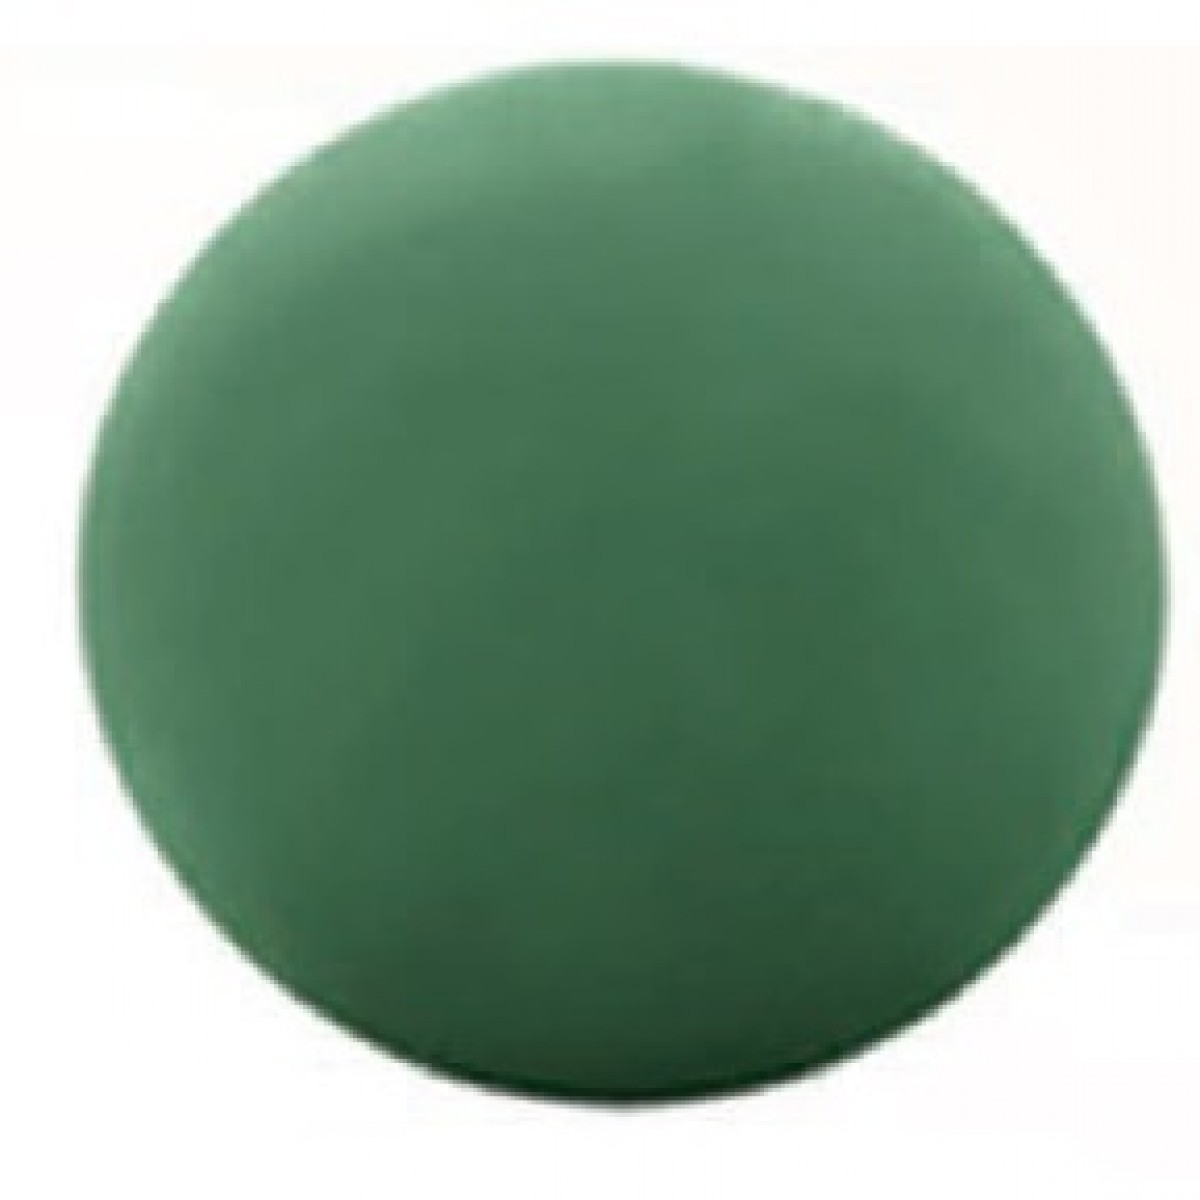 80mm (1 No) Oasis Floral Foam Spheres without Net